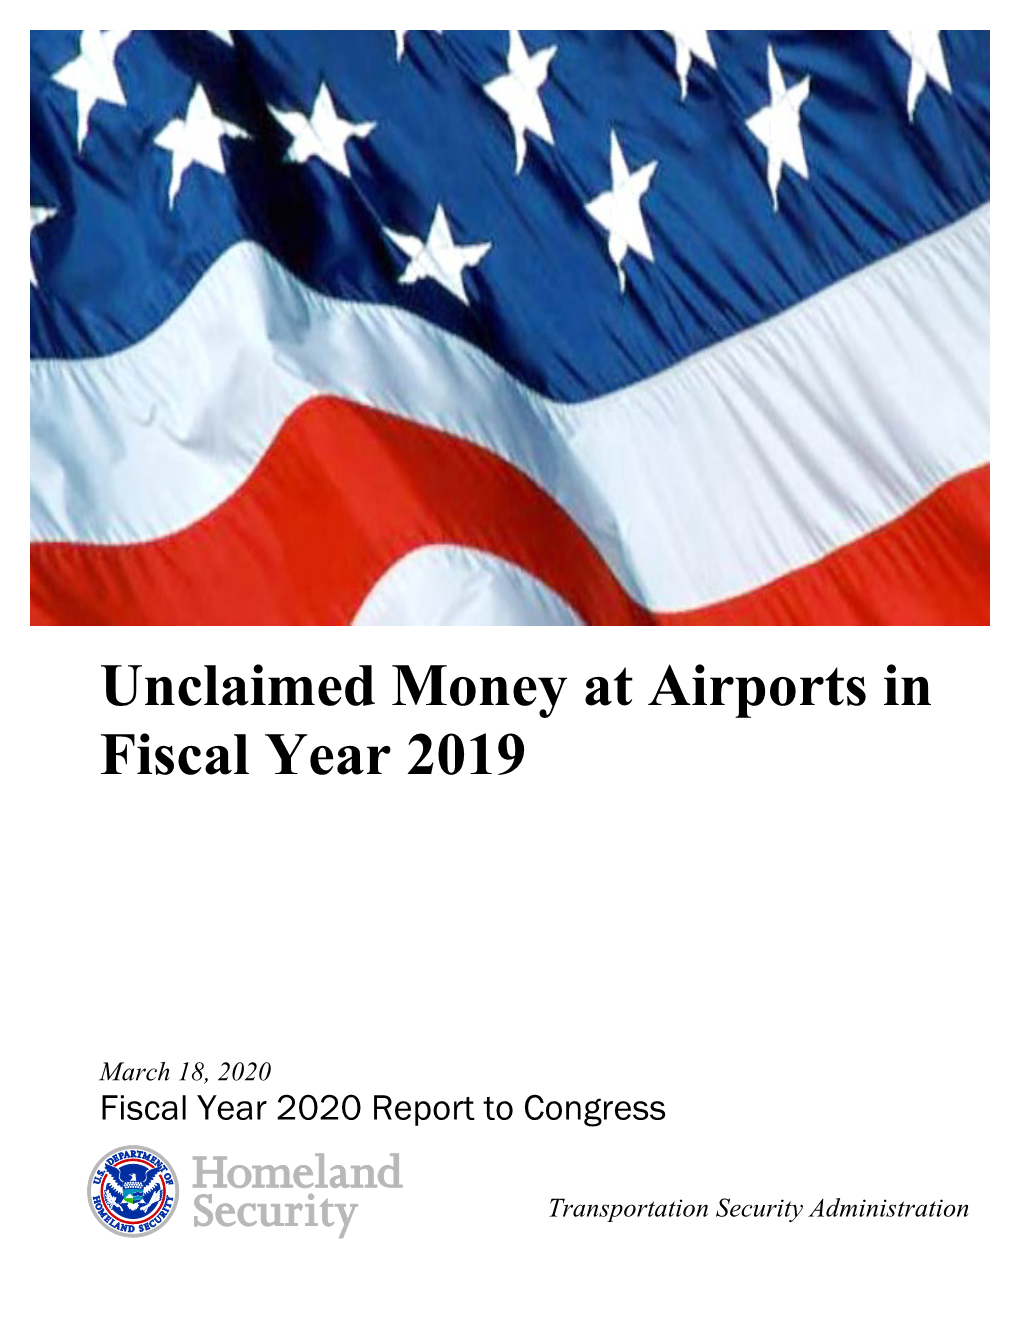 Unclaimed Money at Airports in Fiscal Year 2019